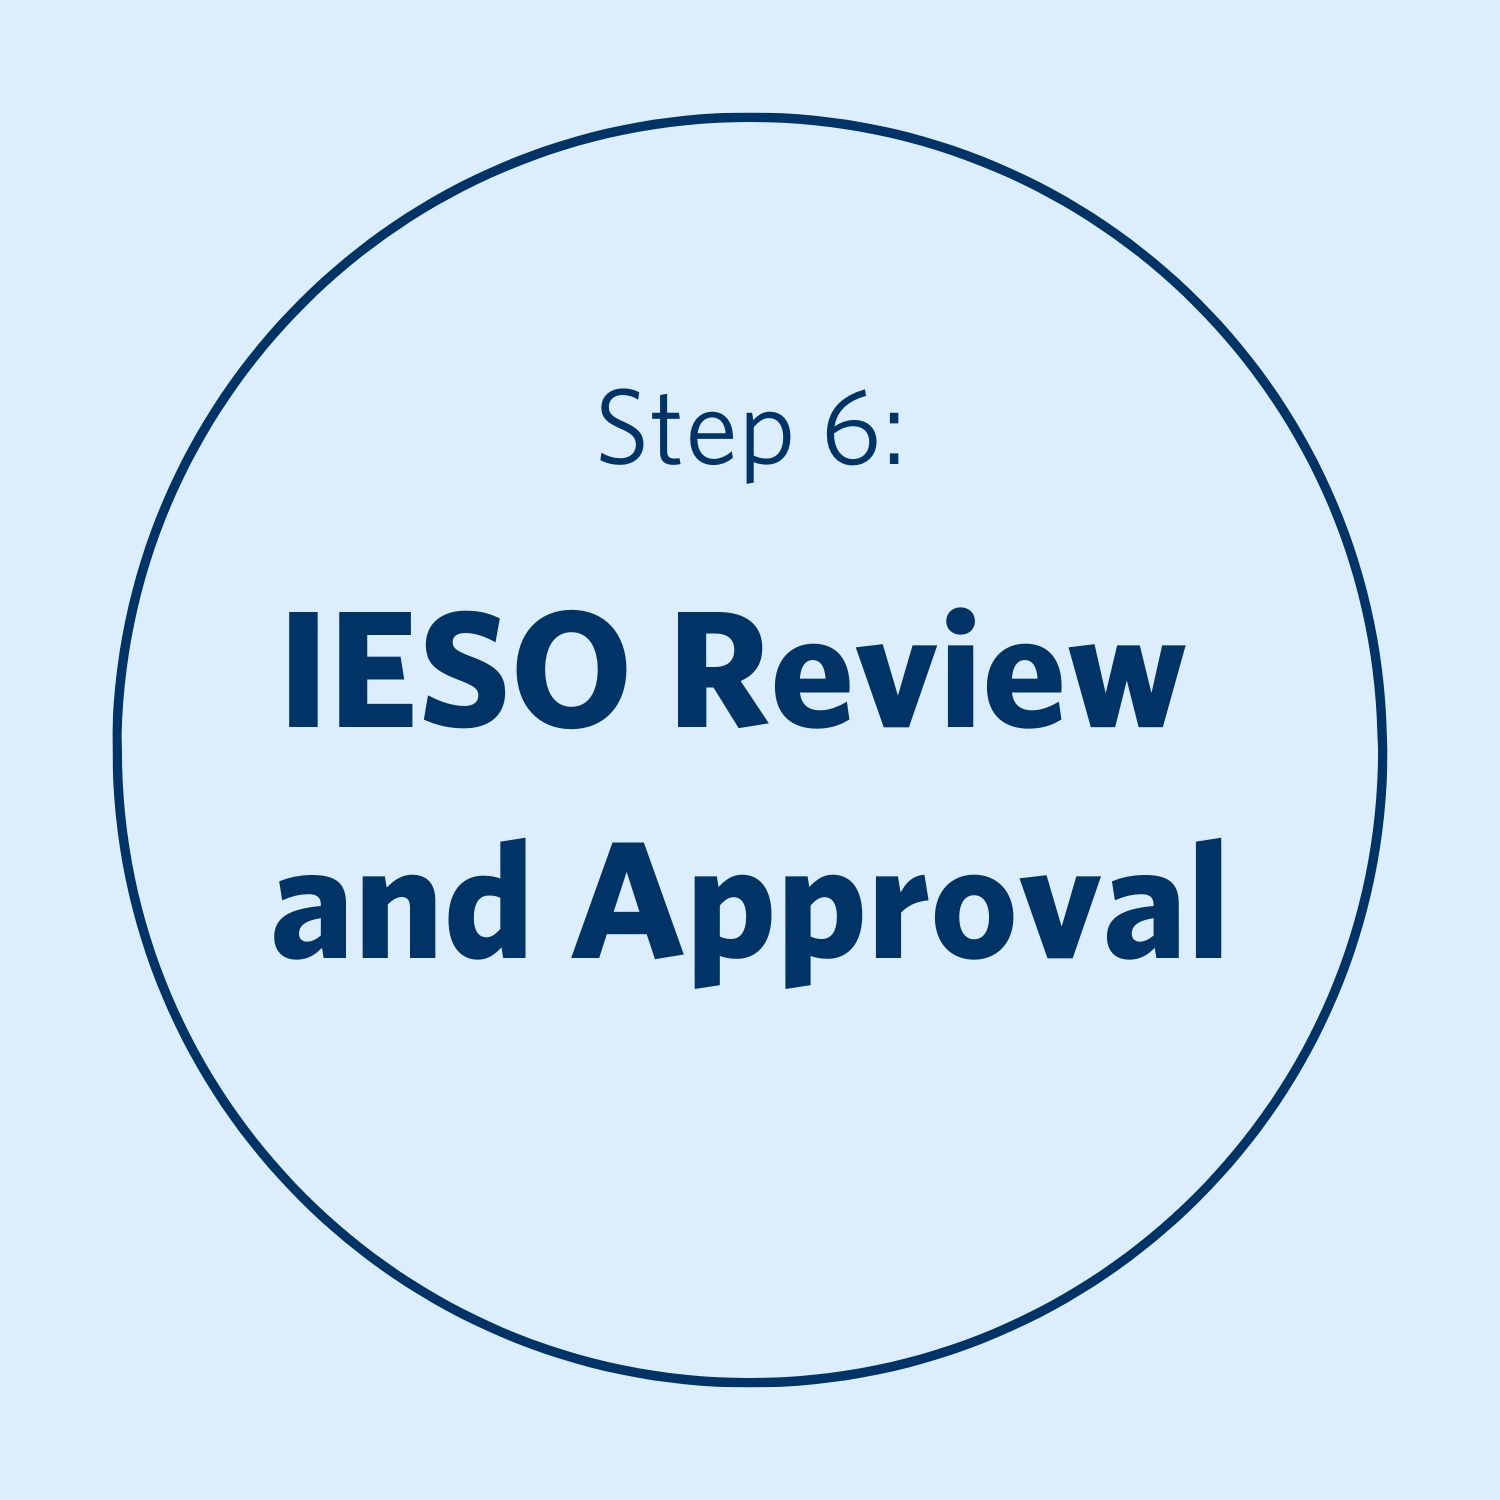 Step 6: IESO Review and Approval